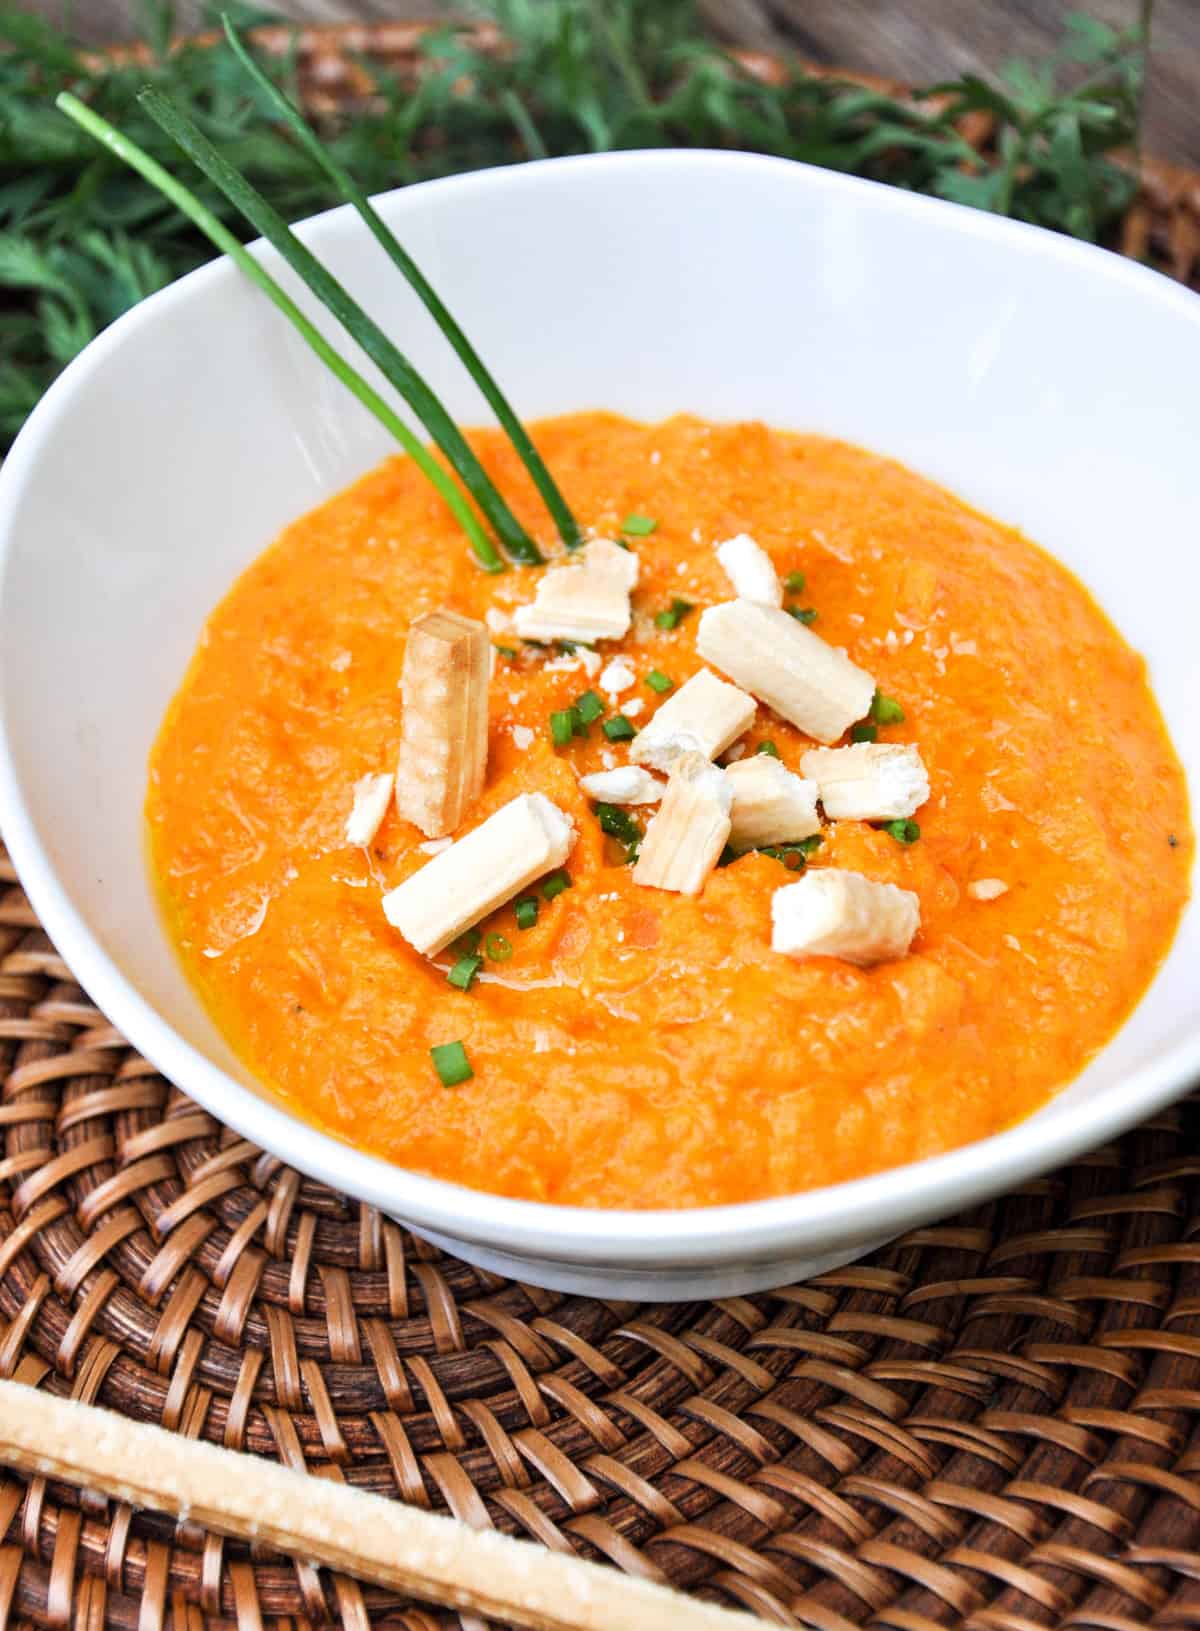 Roasted Carrot Soup with chives and bread crumbs